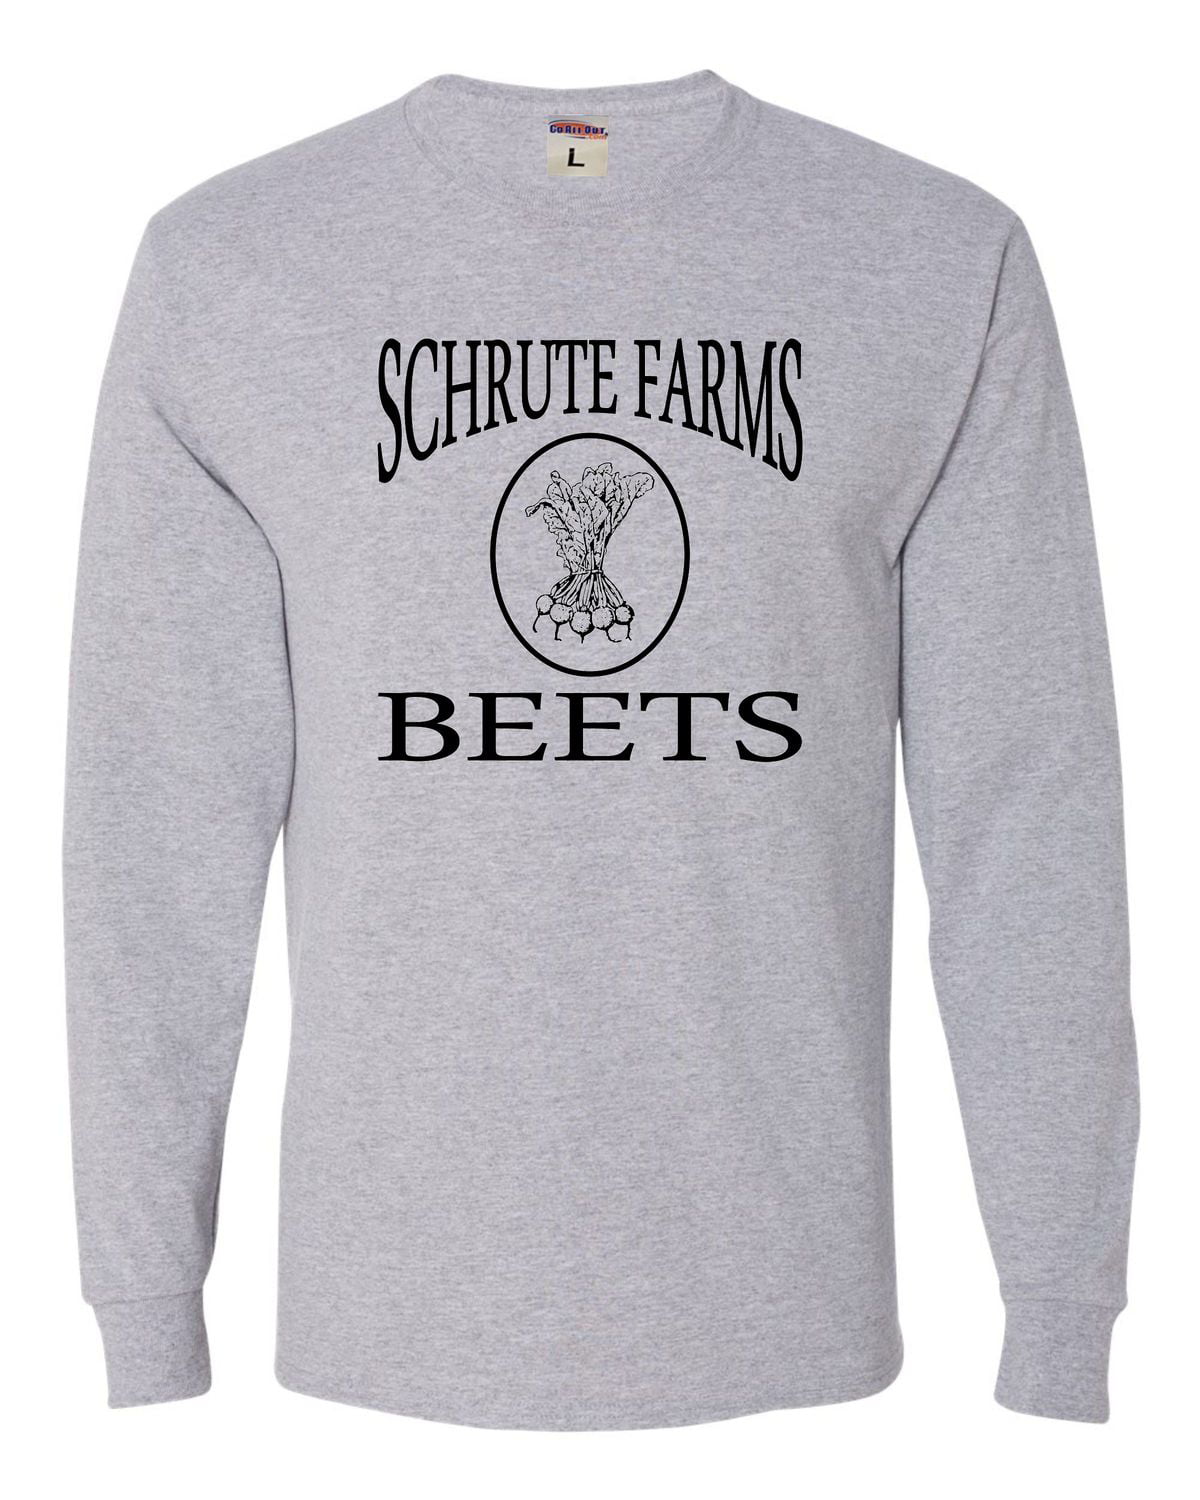 DFGHJZH-L Schrute Farms Beets Mens Casual Adult Long Sleeve T Shirts 